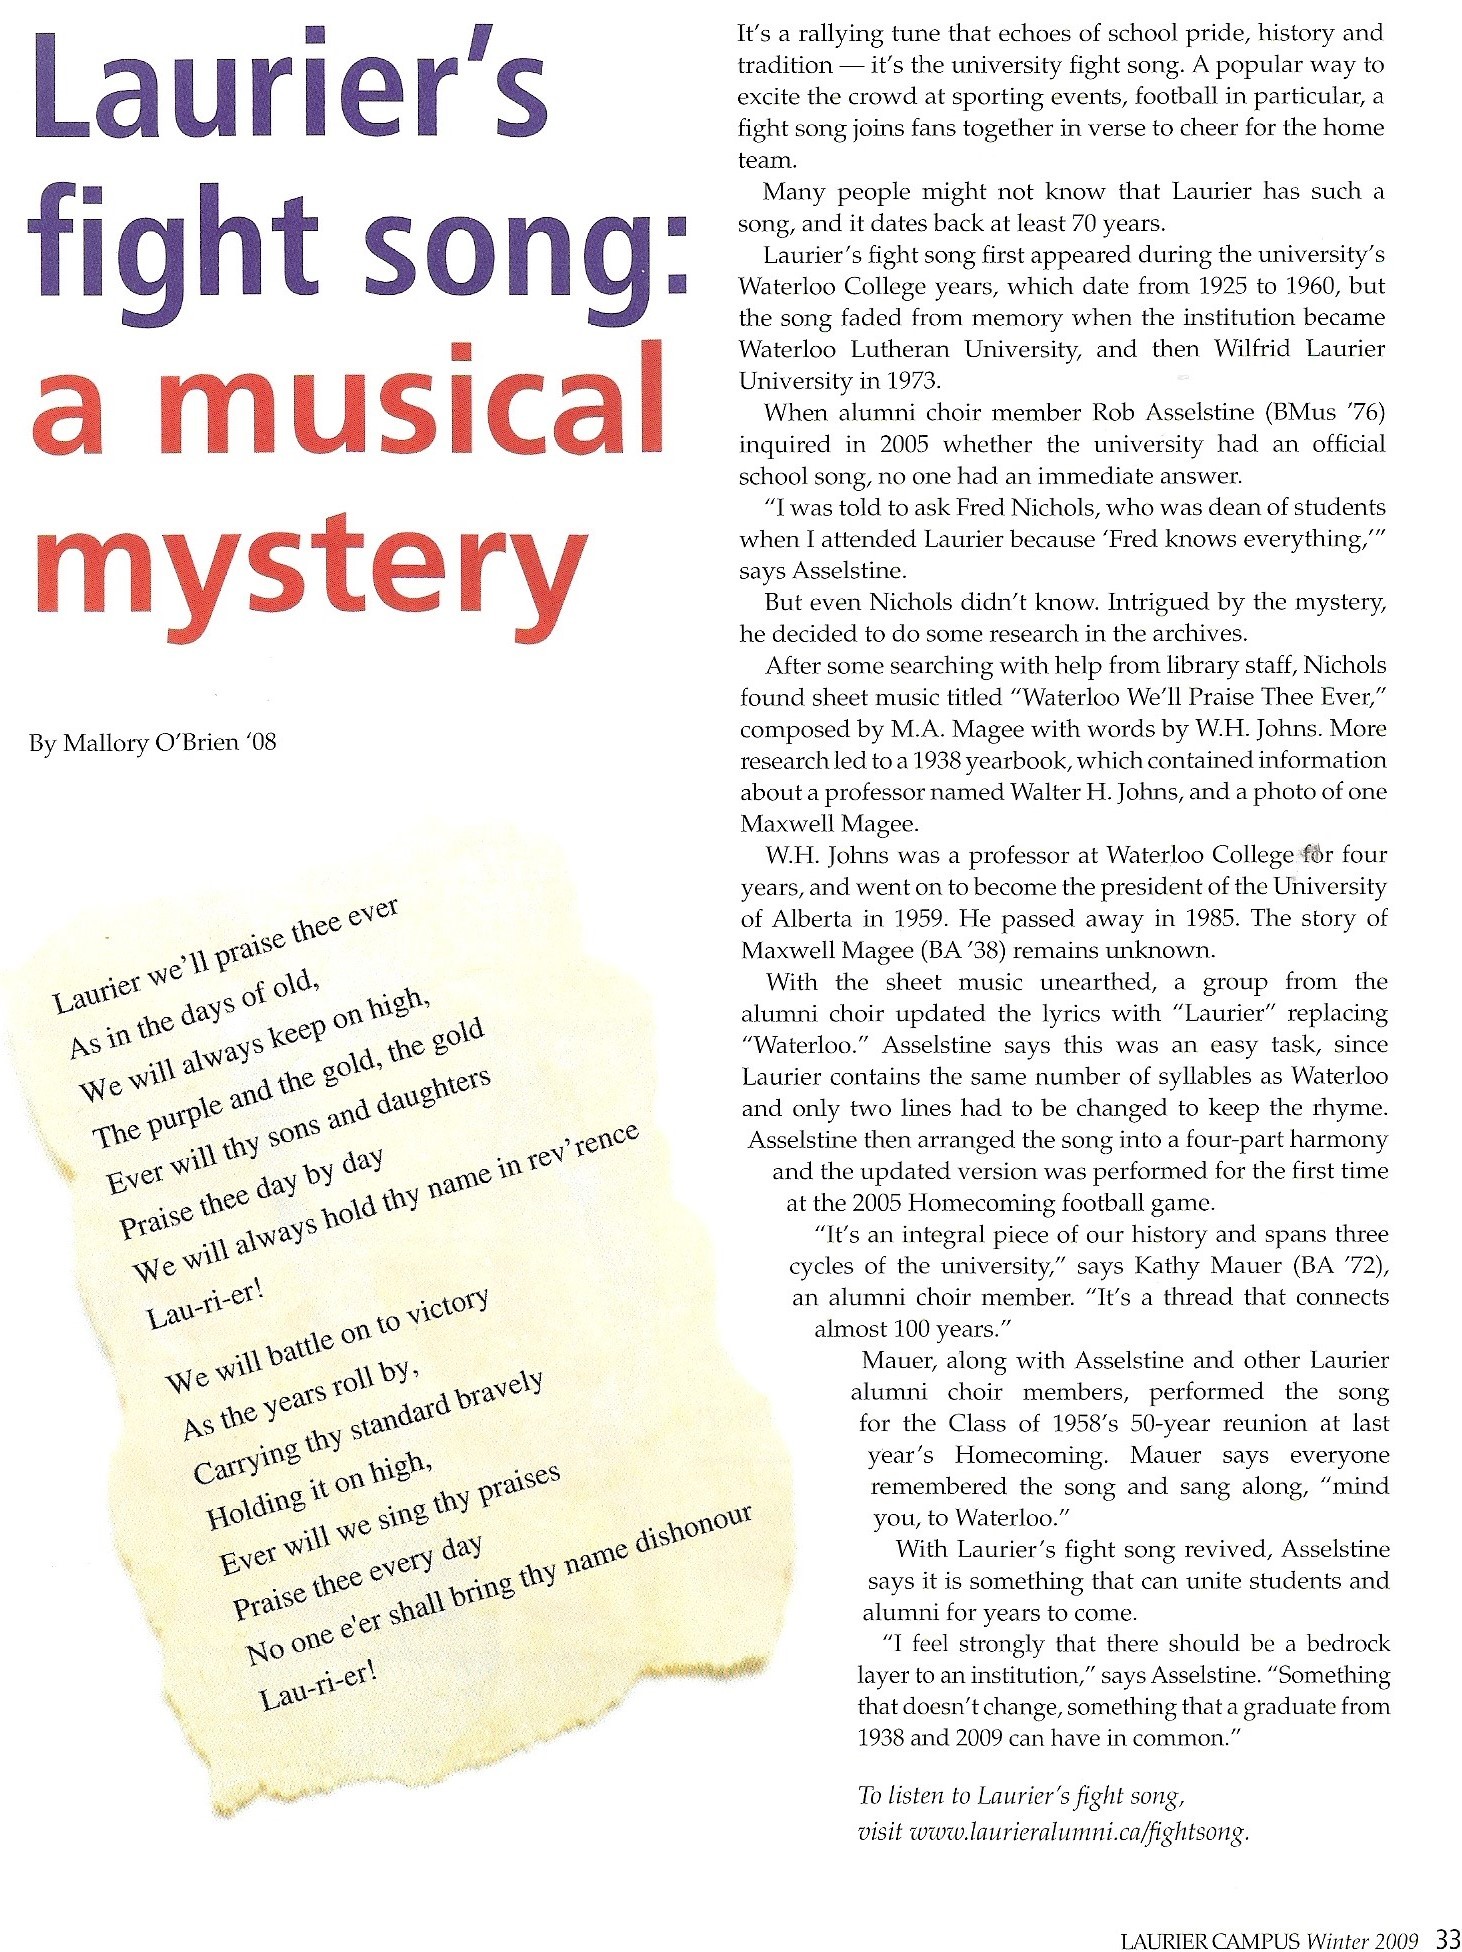 A scanned image of a copy of an article entitled "Laurier's Fight Song: A Musical Mystery".